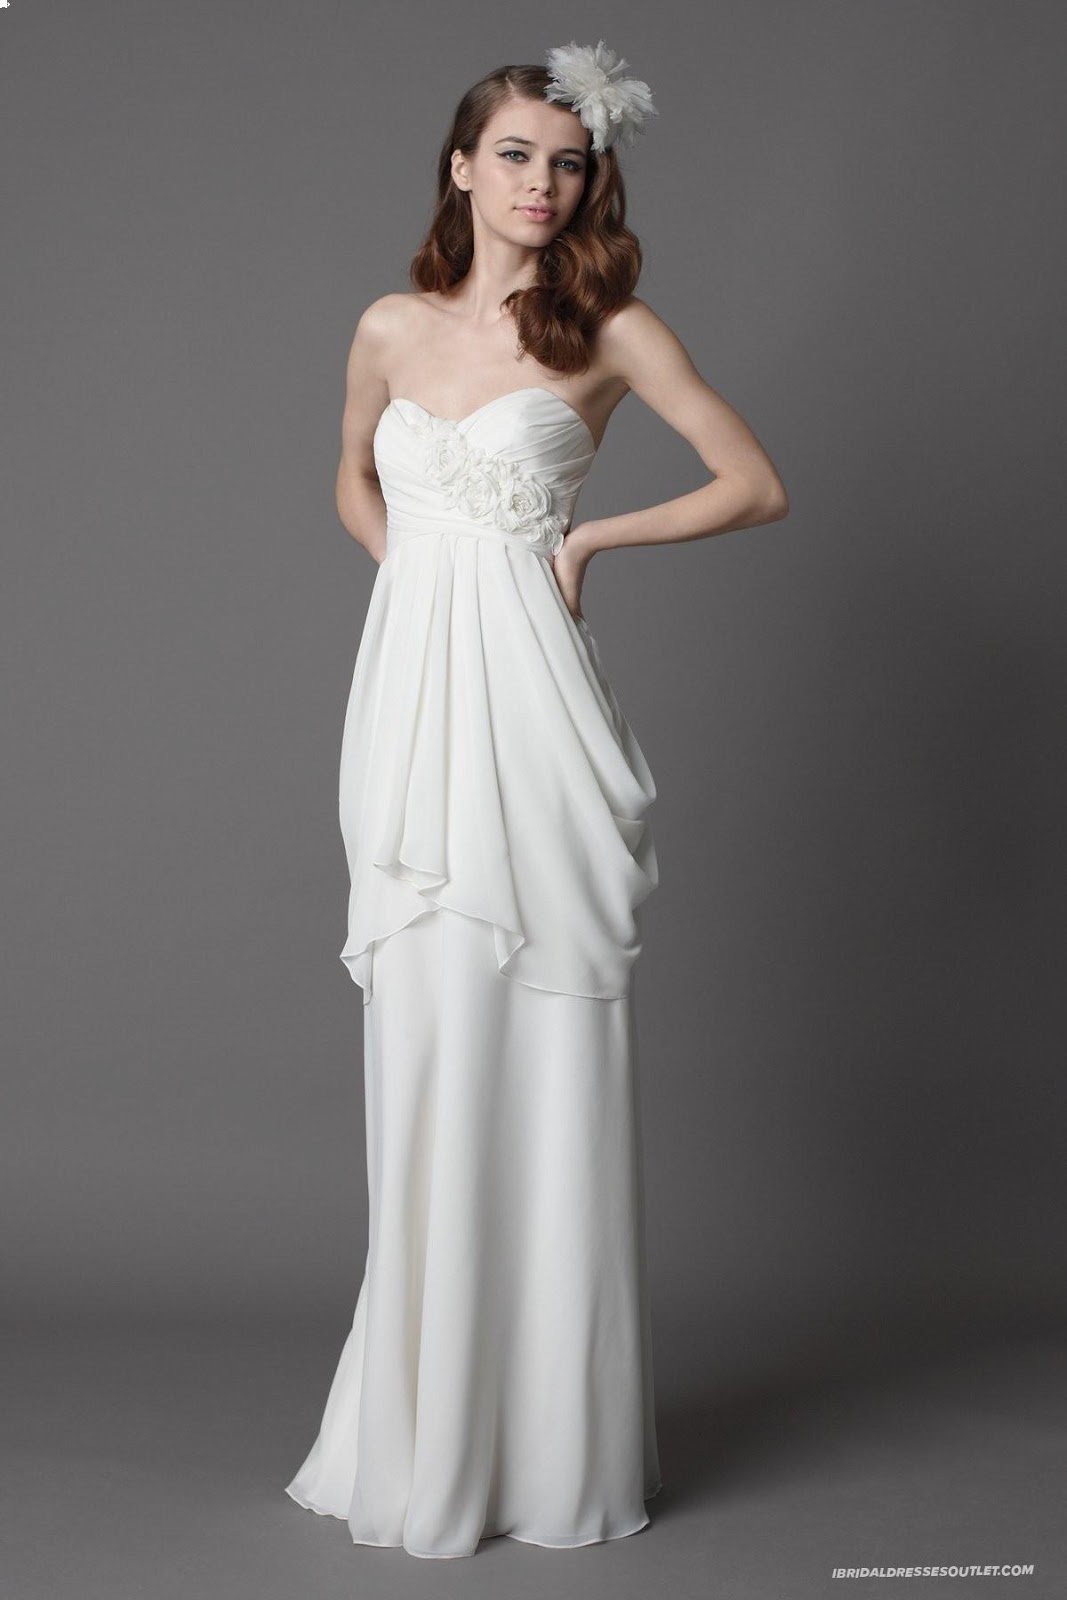 Choose Your Fashion Style: Casual Wedding Dresses for ...